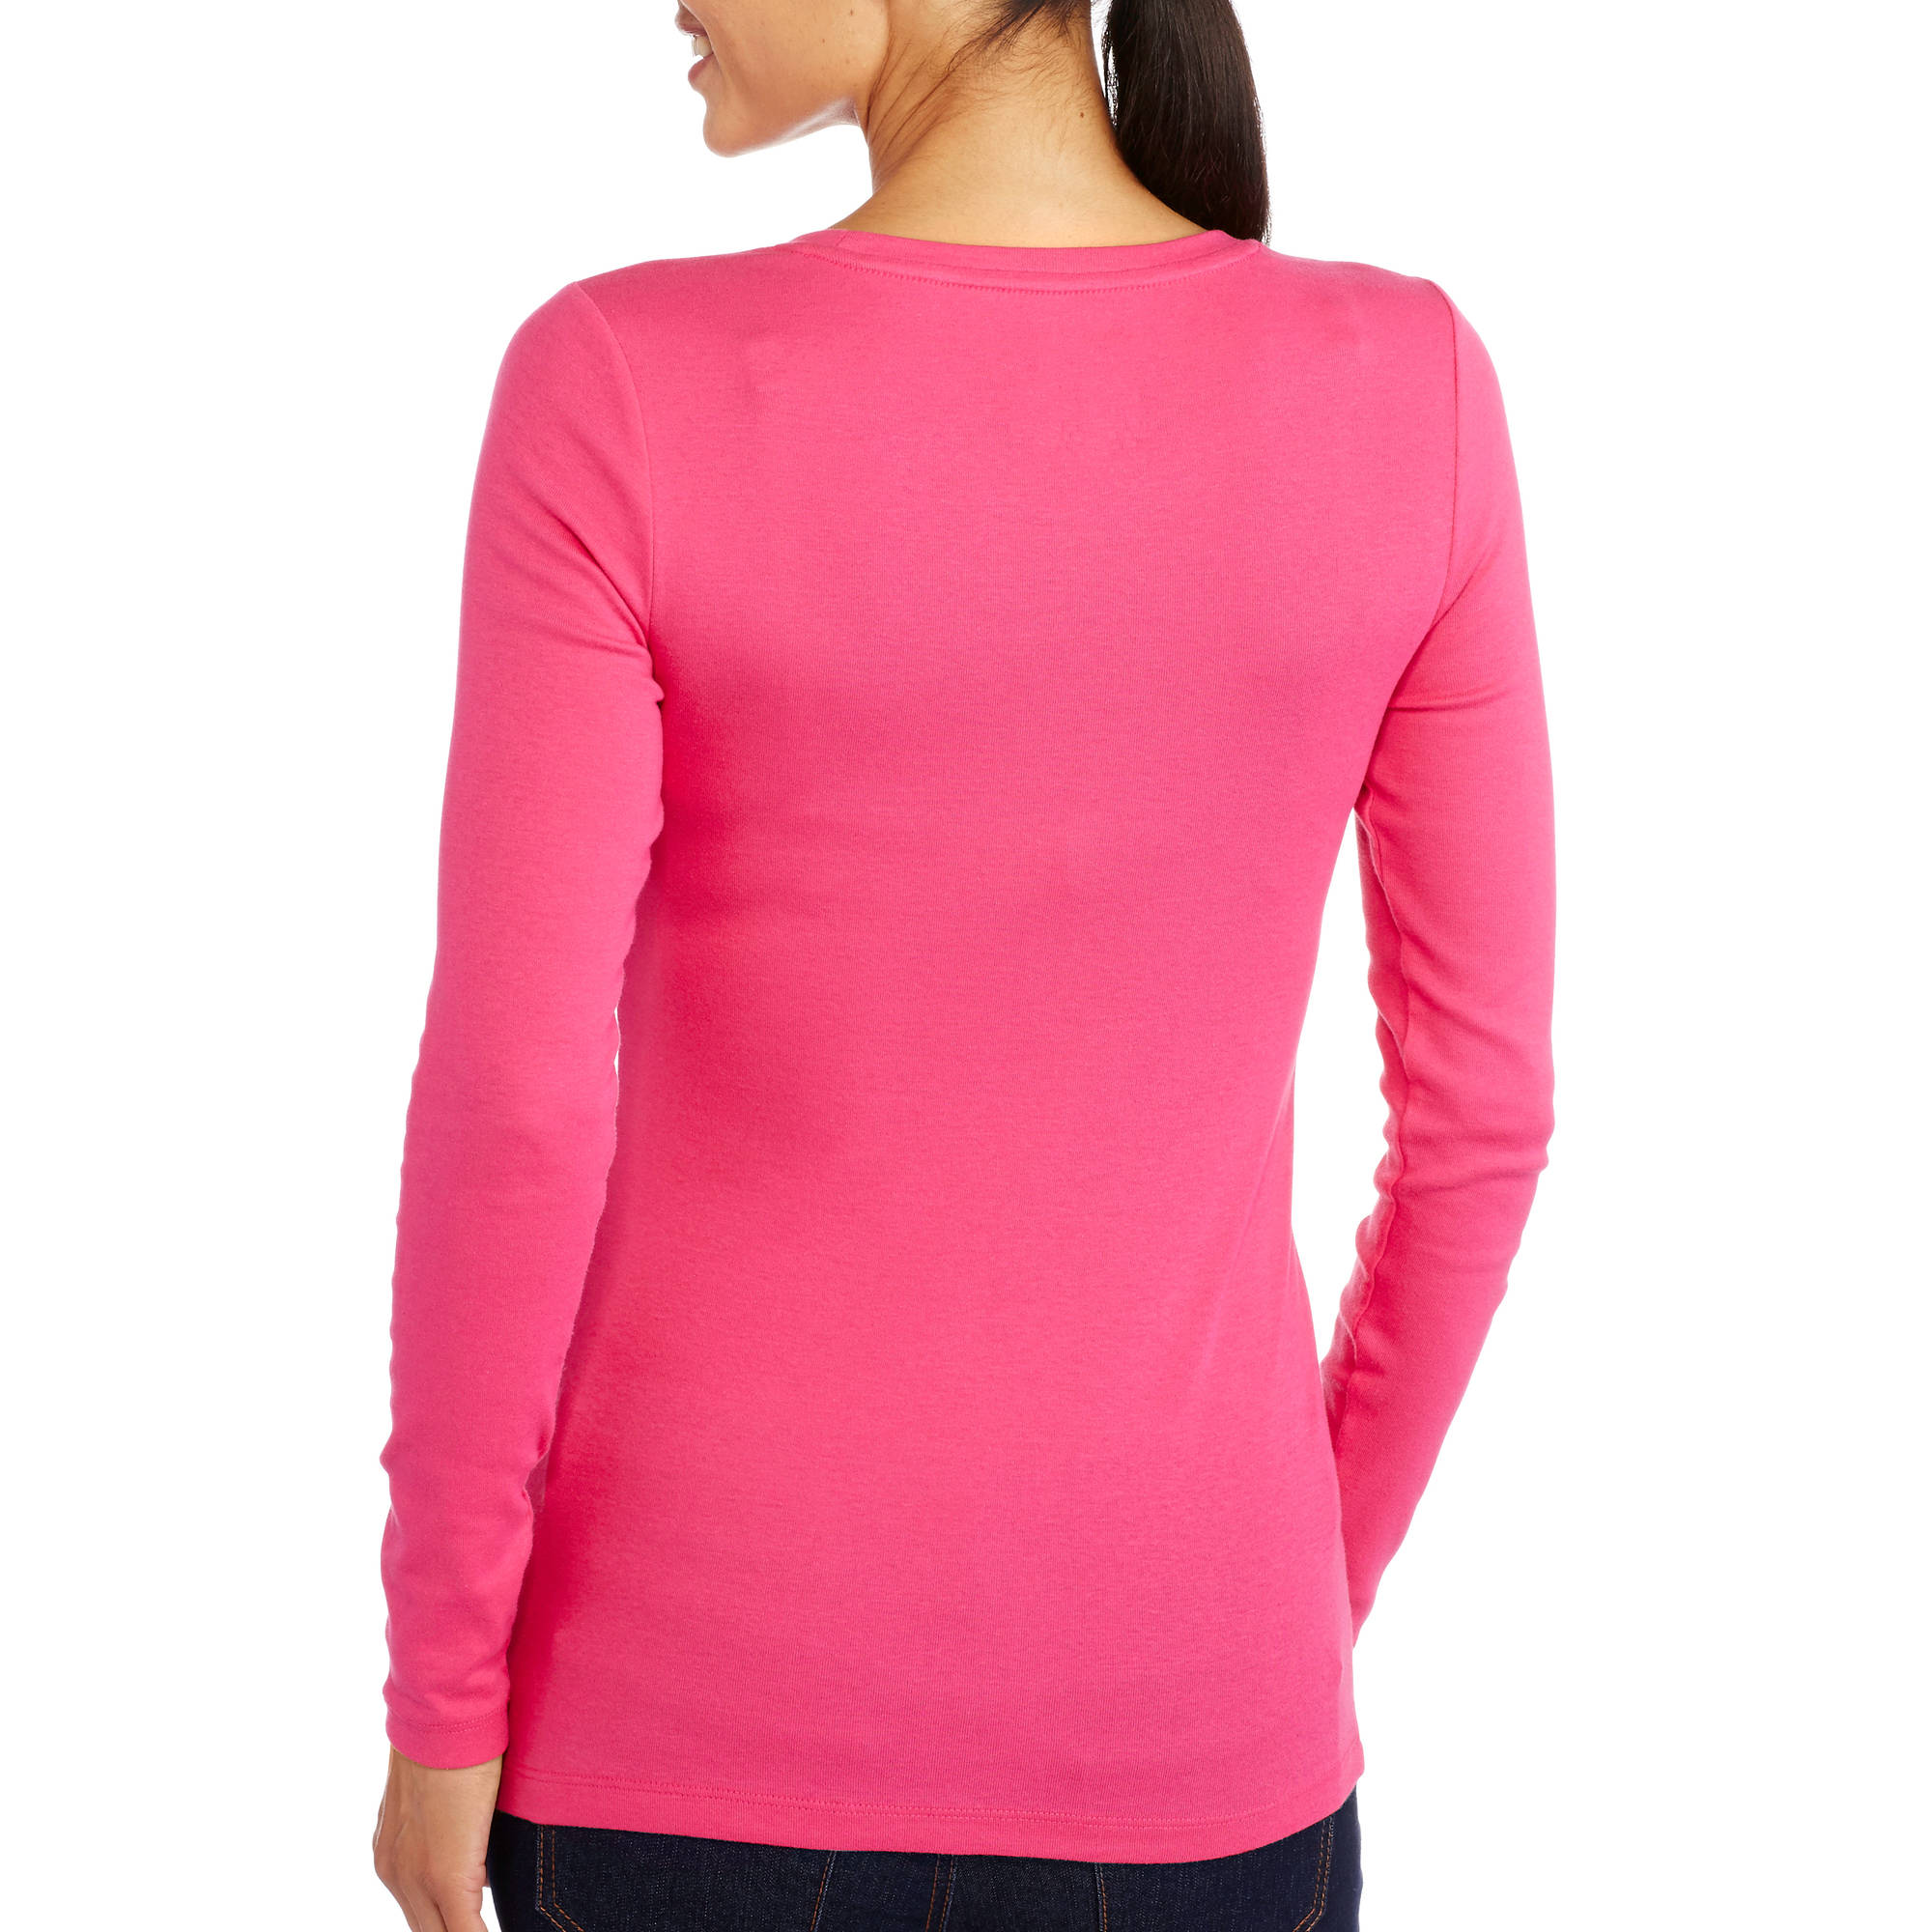 Women's Essential Long Sleeve Crew T-Shirt - image 2 of 2